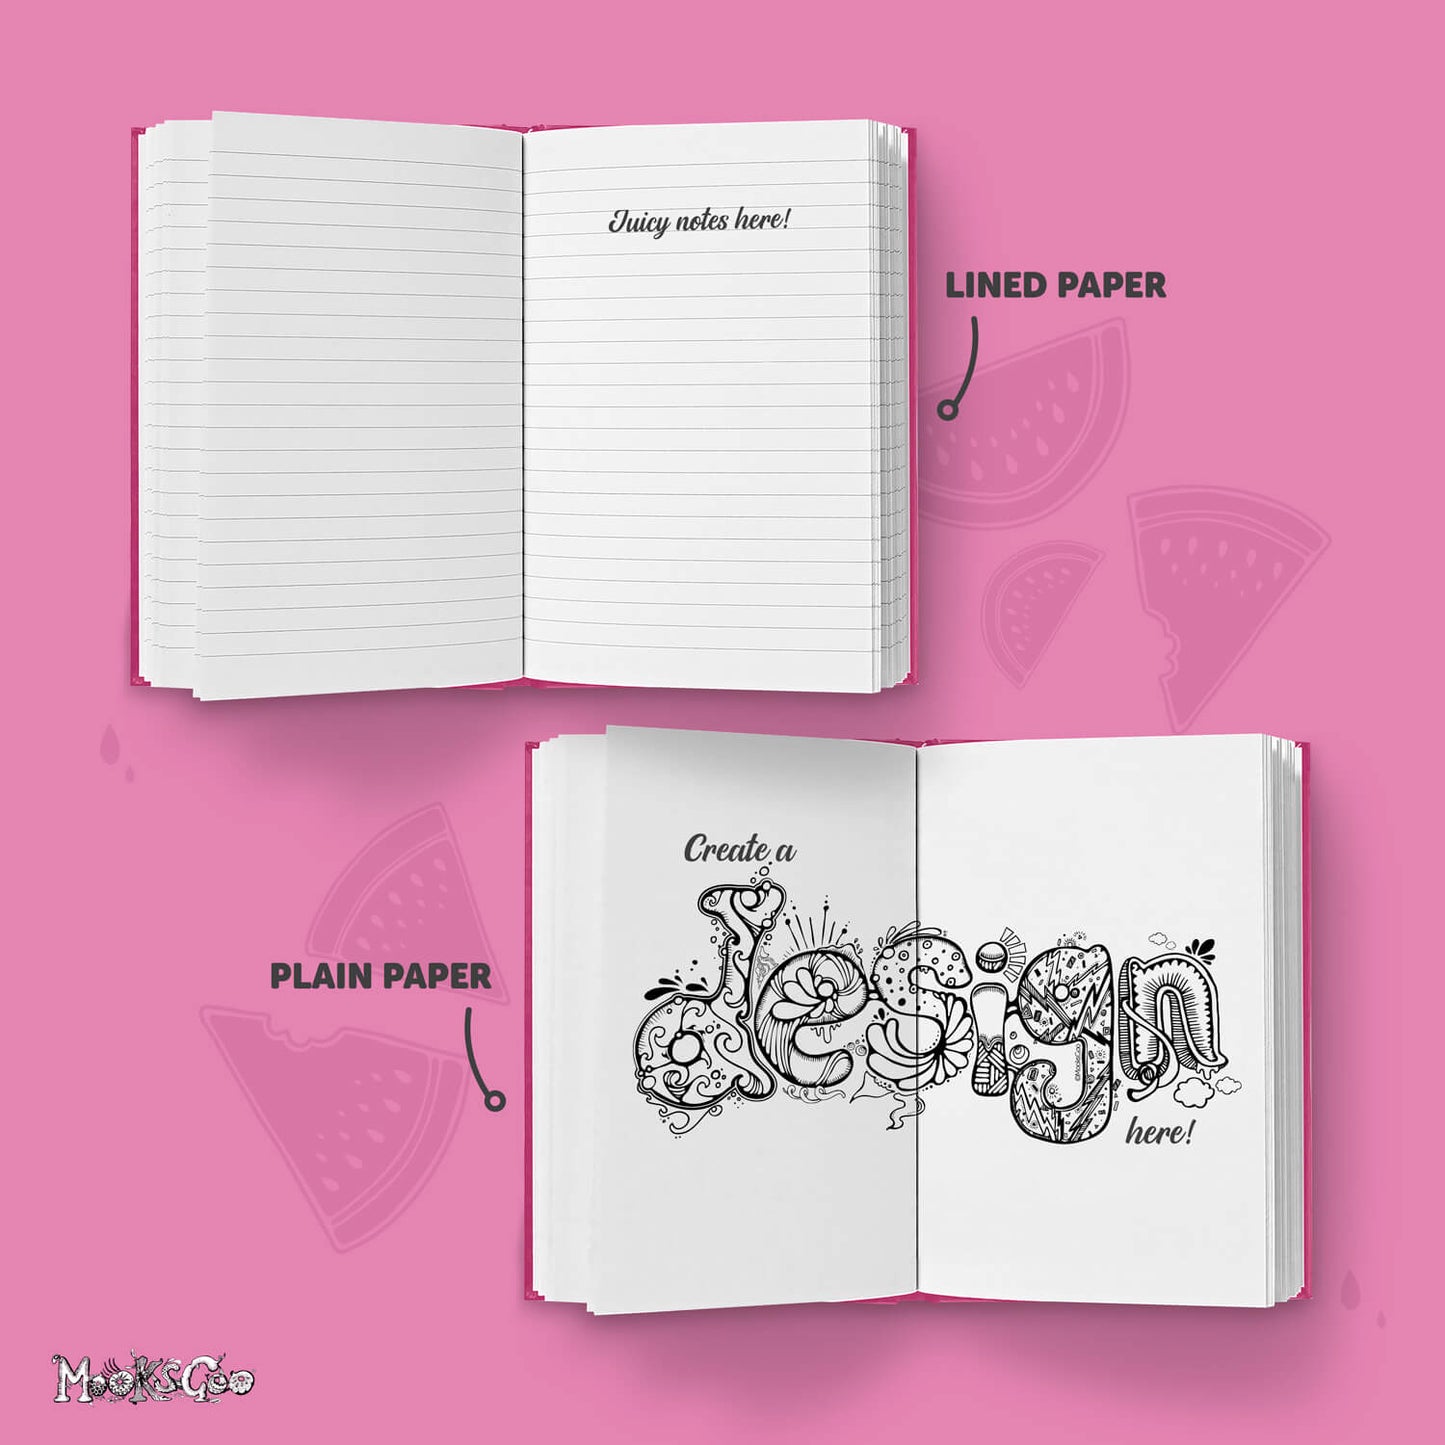 inside lined or plain pages of the personalised melon journal, diary or notebook with watercolour pink and green splashes, designed by MooksGoo